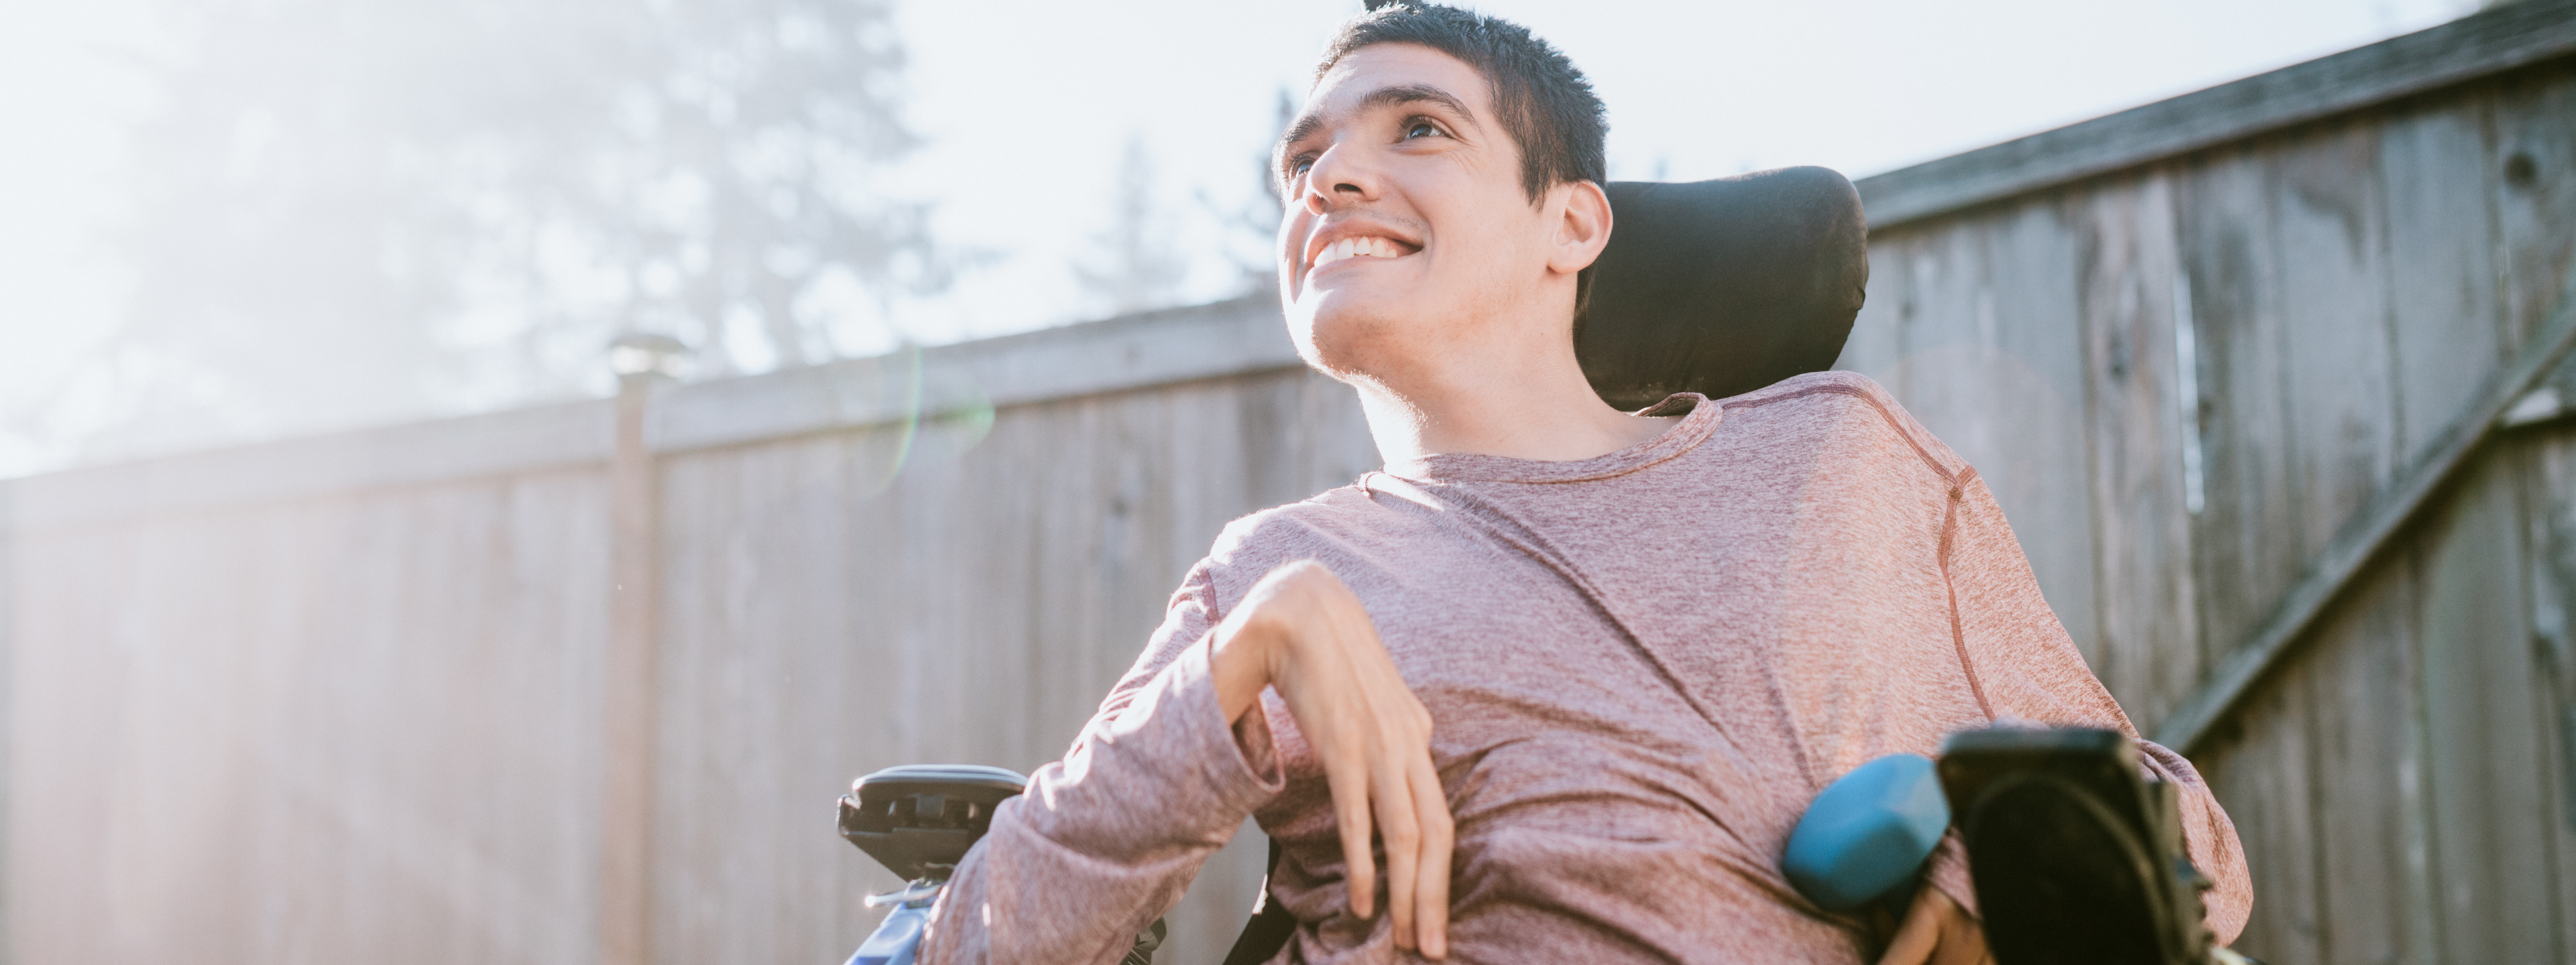 Young man in a wheelchair smiling